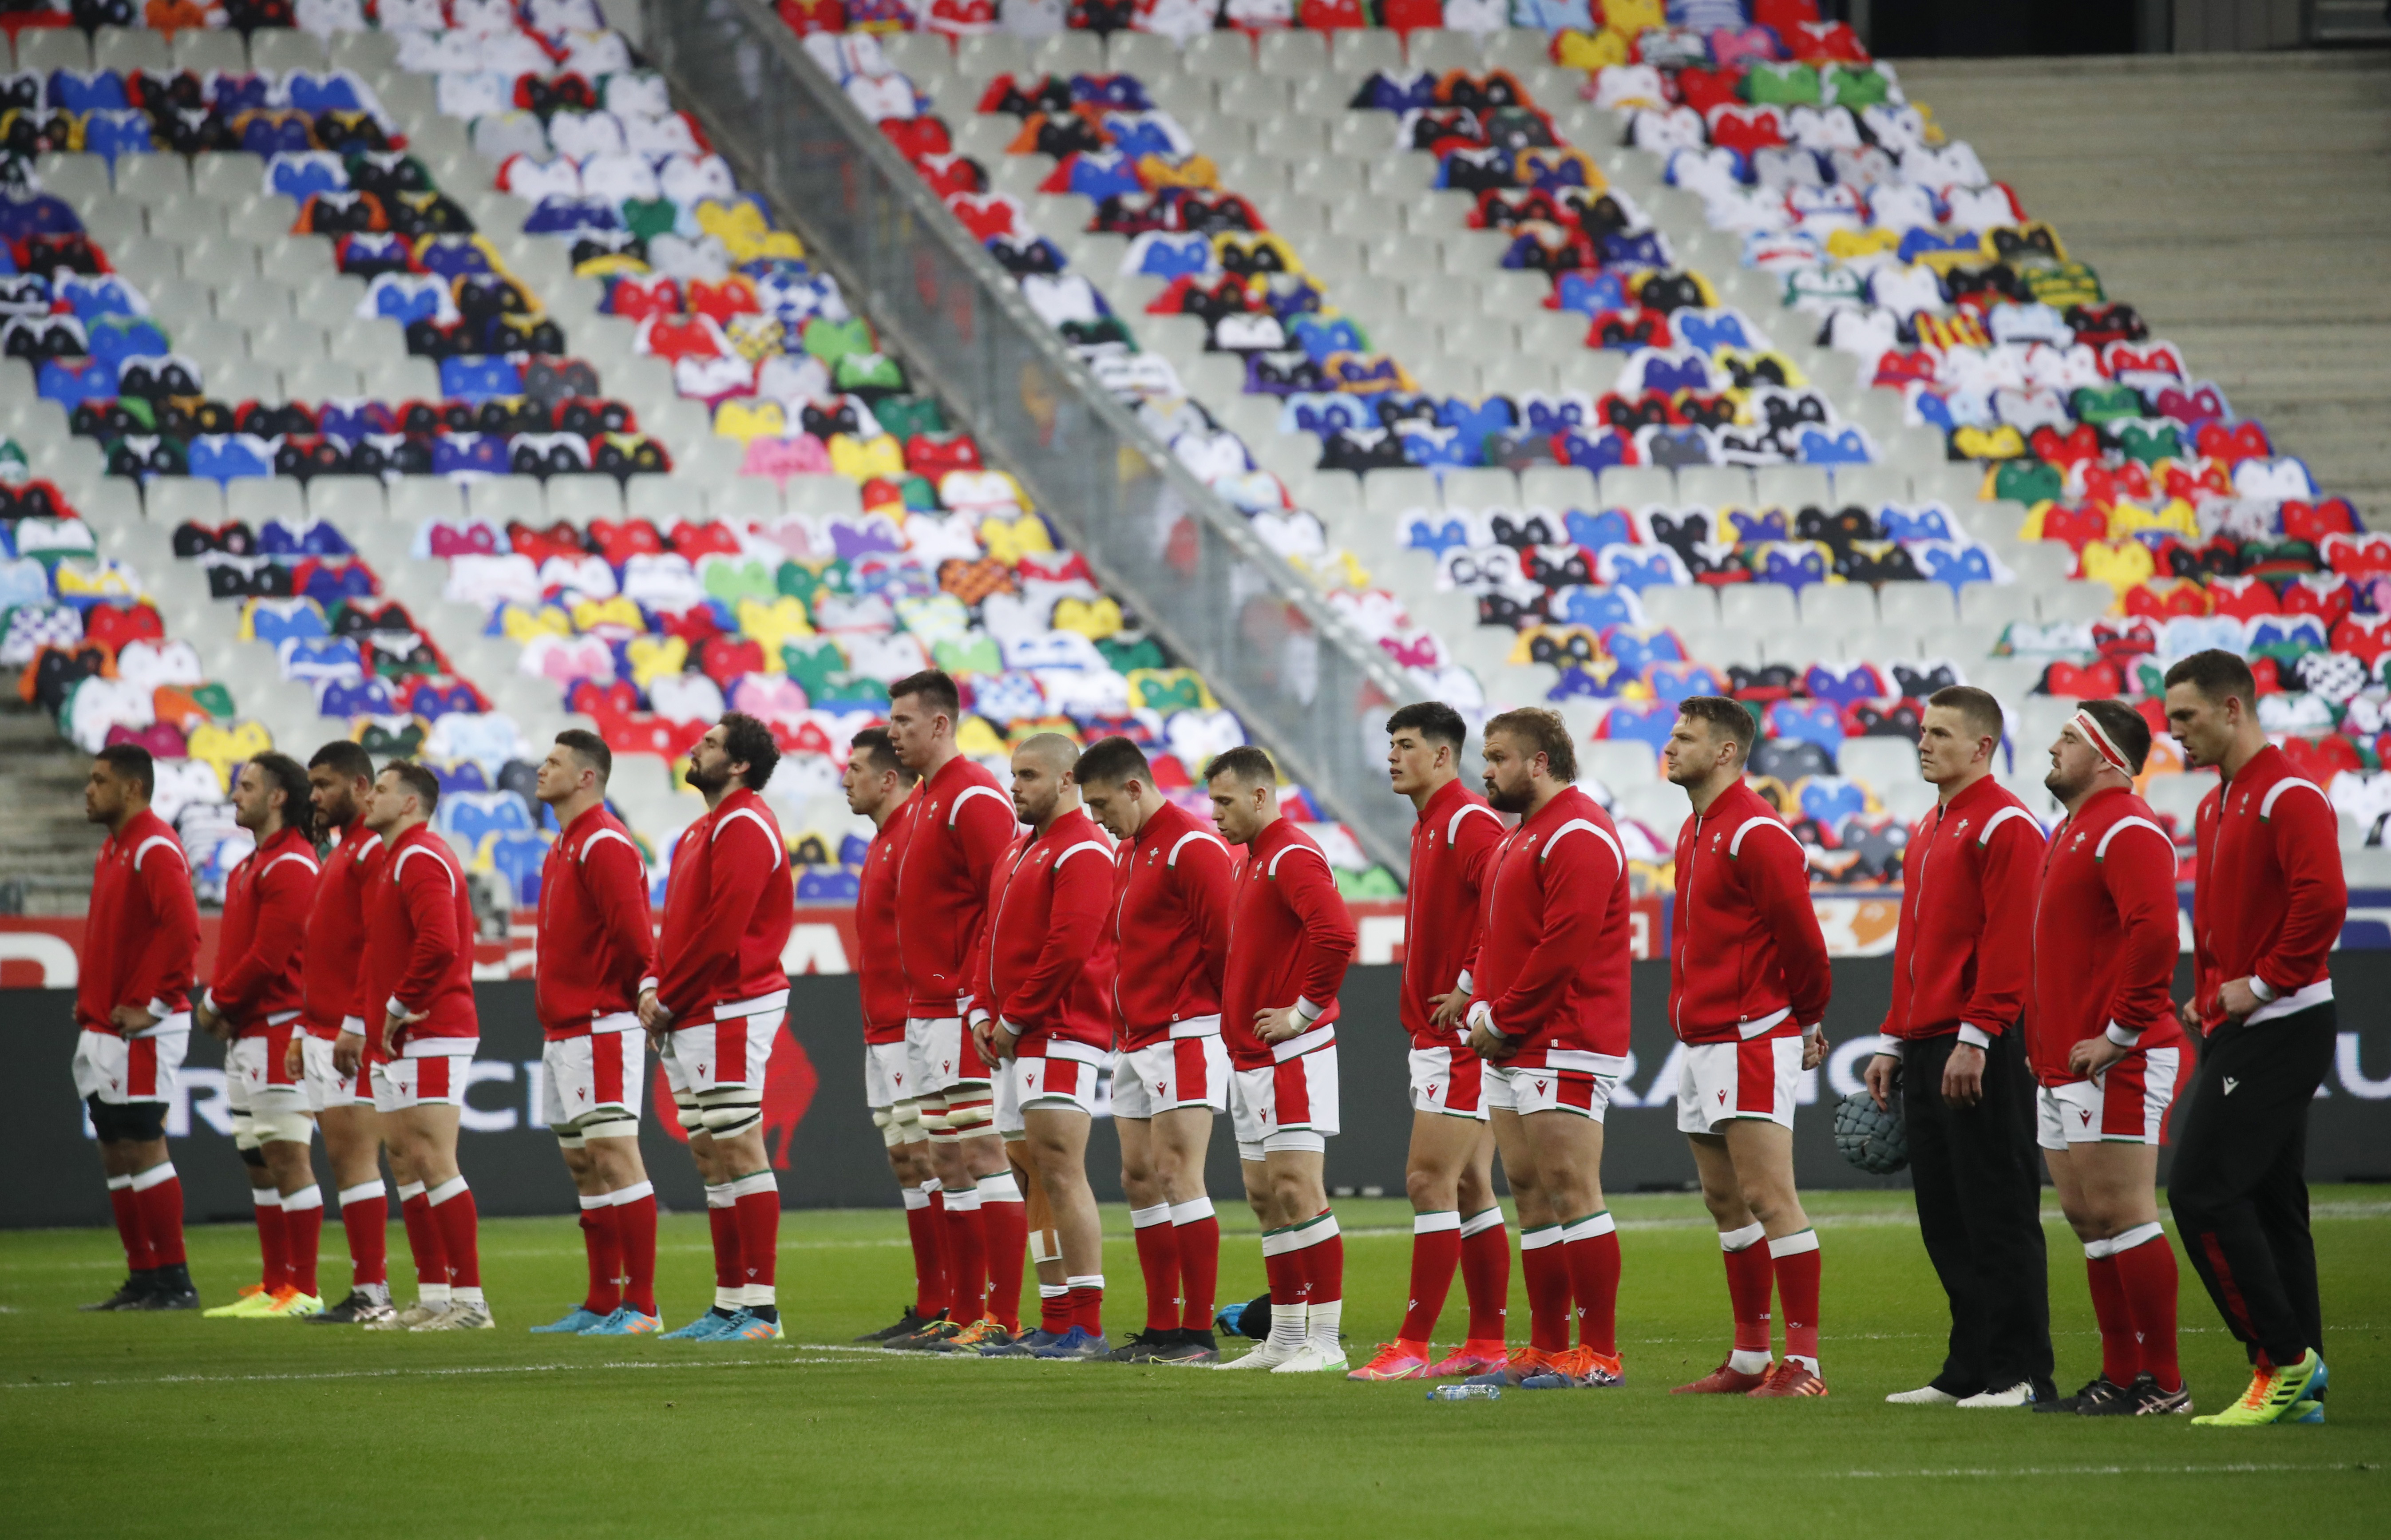 Rugby-Wales condemn online abuse after Six Nations defeat Reuters